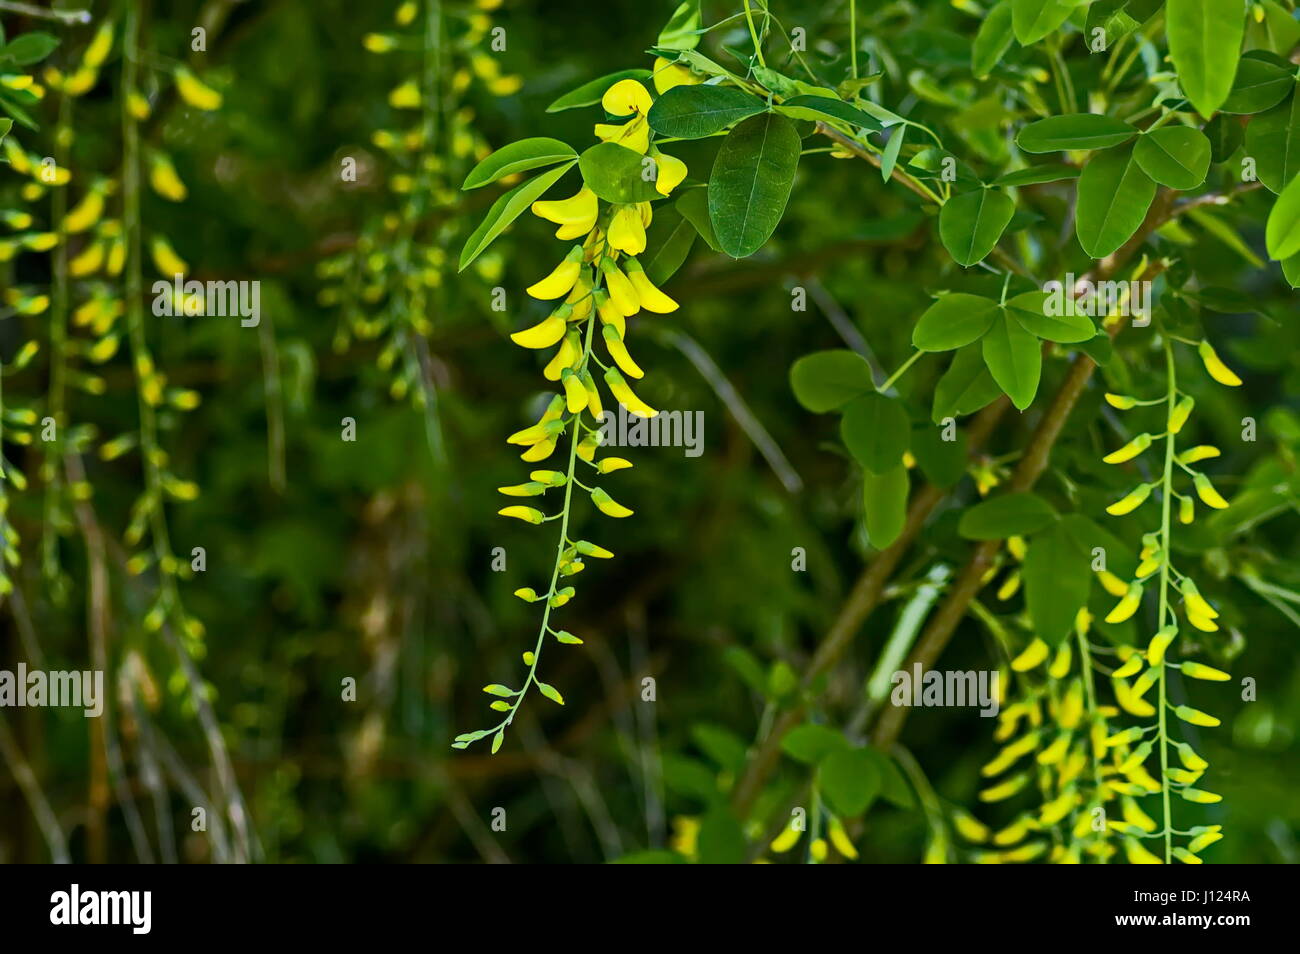 Yellow acacia tree or Caragana arborescens branch with green leaves and yellow bloom flower, Sofia, Bulgaria Stock Photo